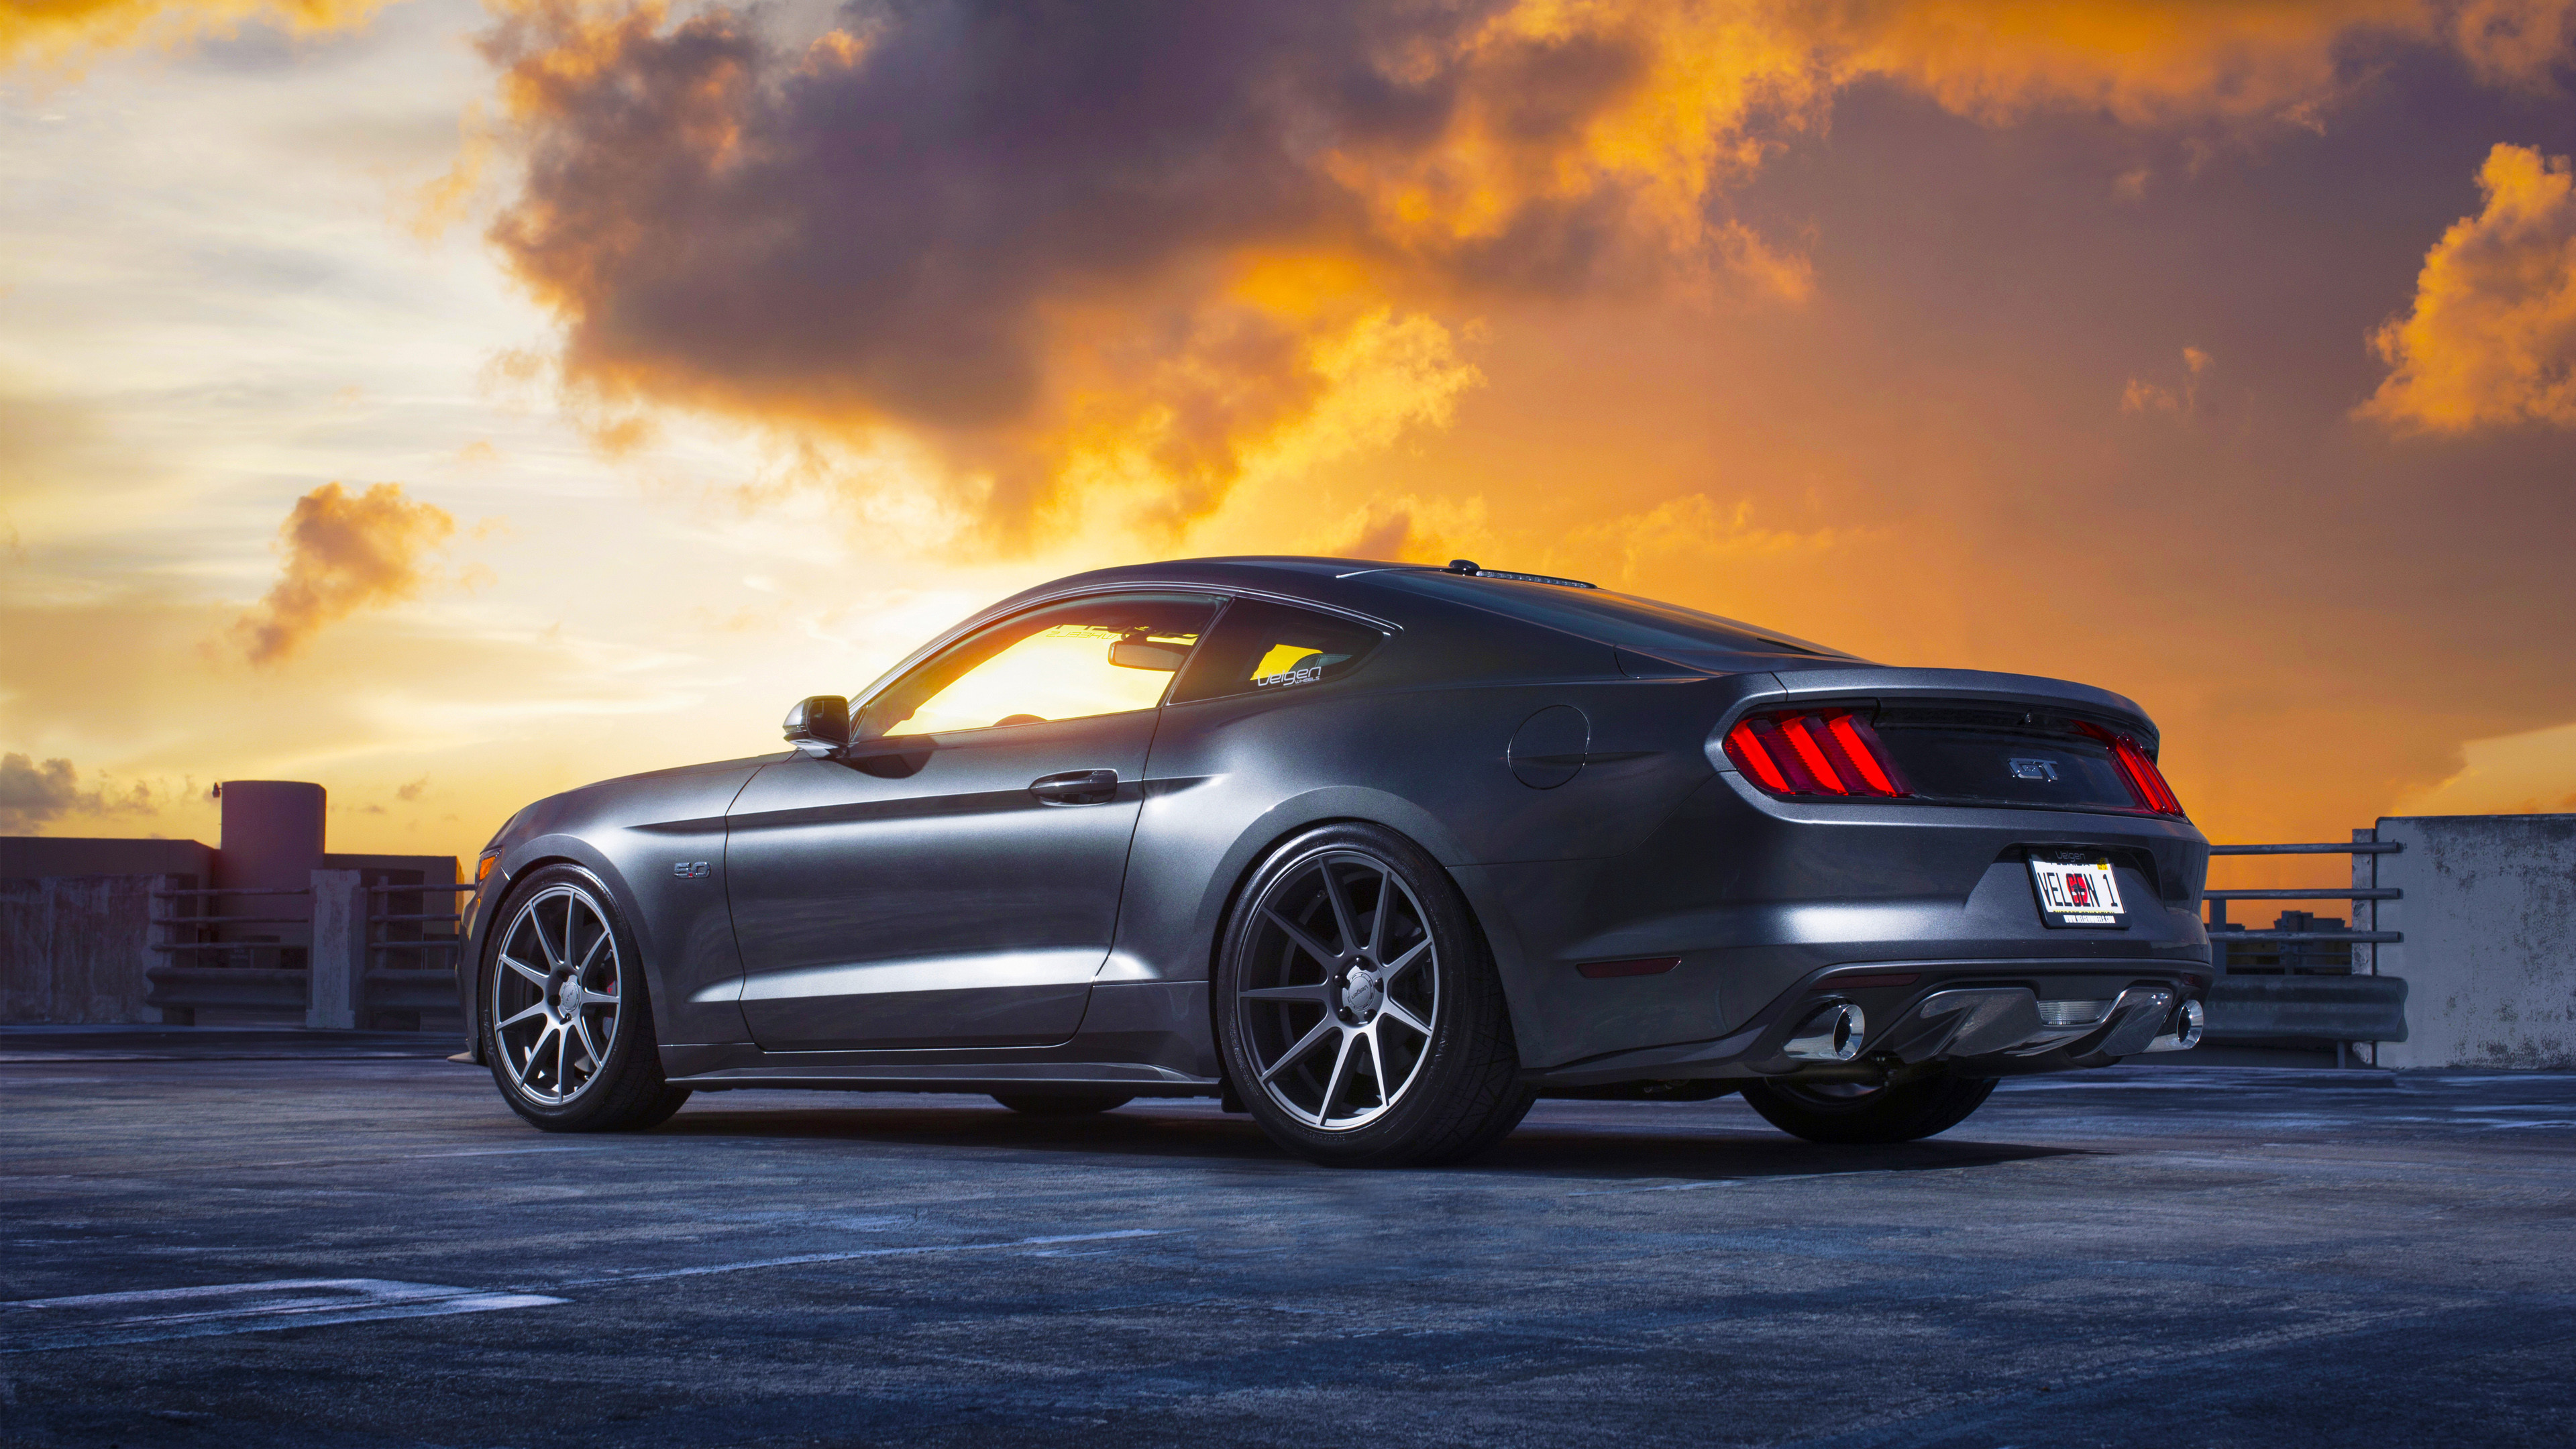 3840x2160 1920x1080 ford mustang hd wallpapers 1080p #820353. Resolation: 510x330  File Size: 58 KB